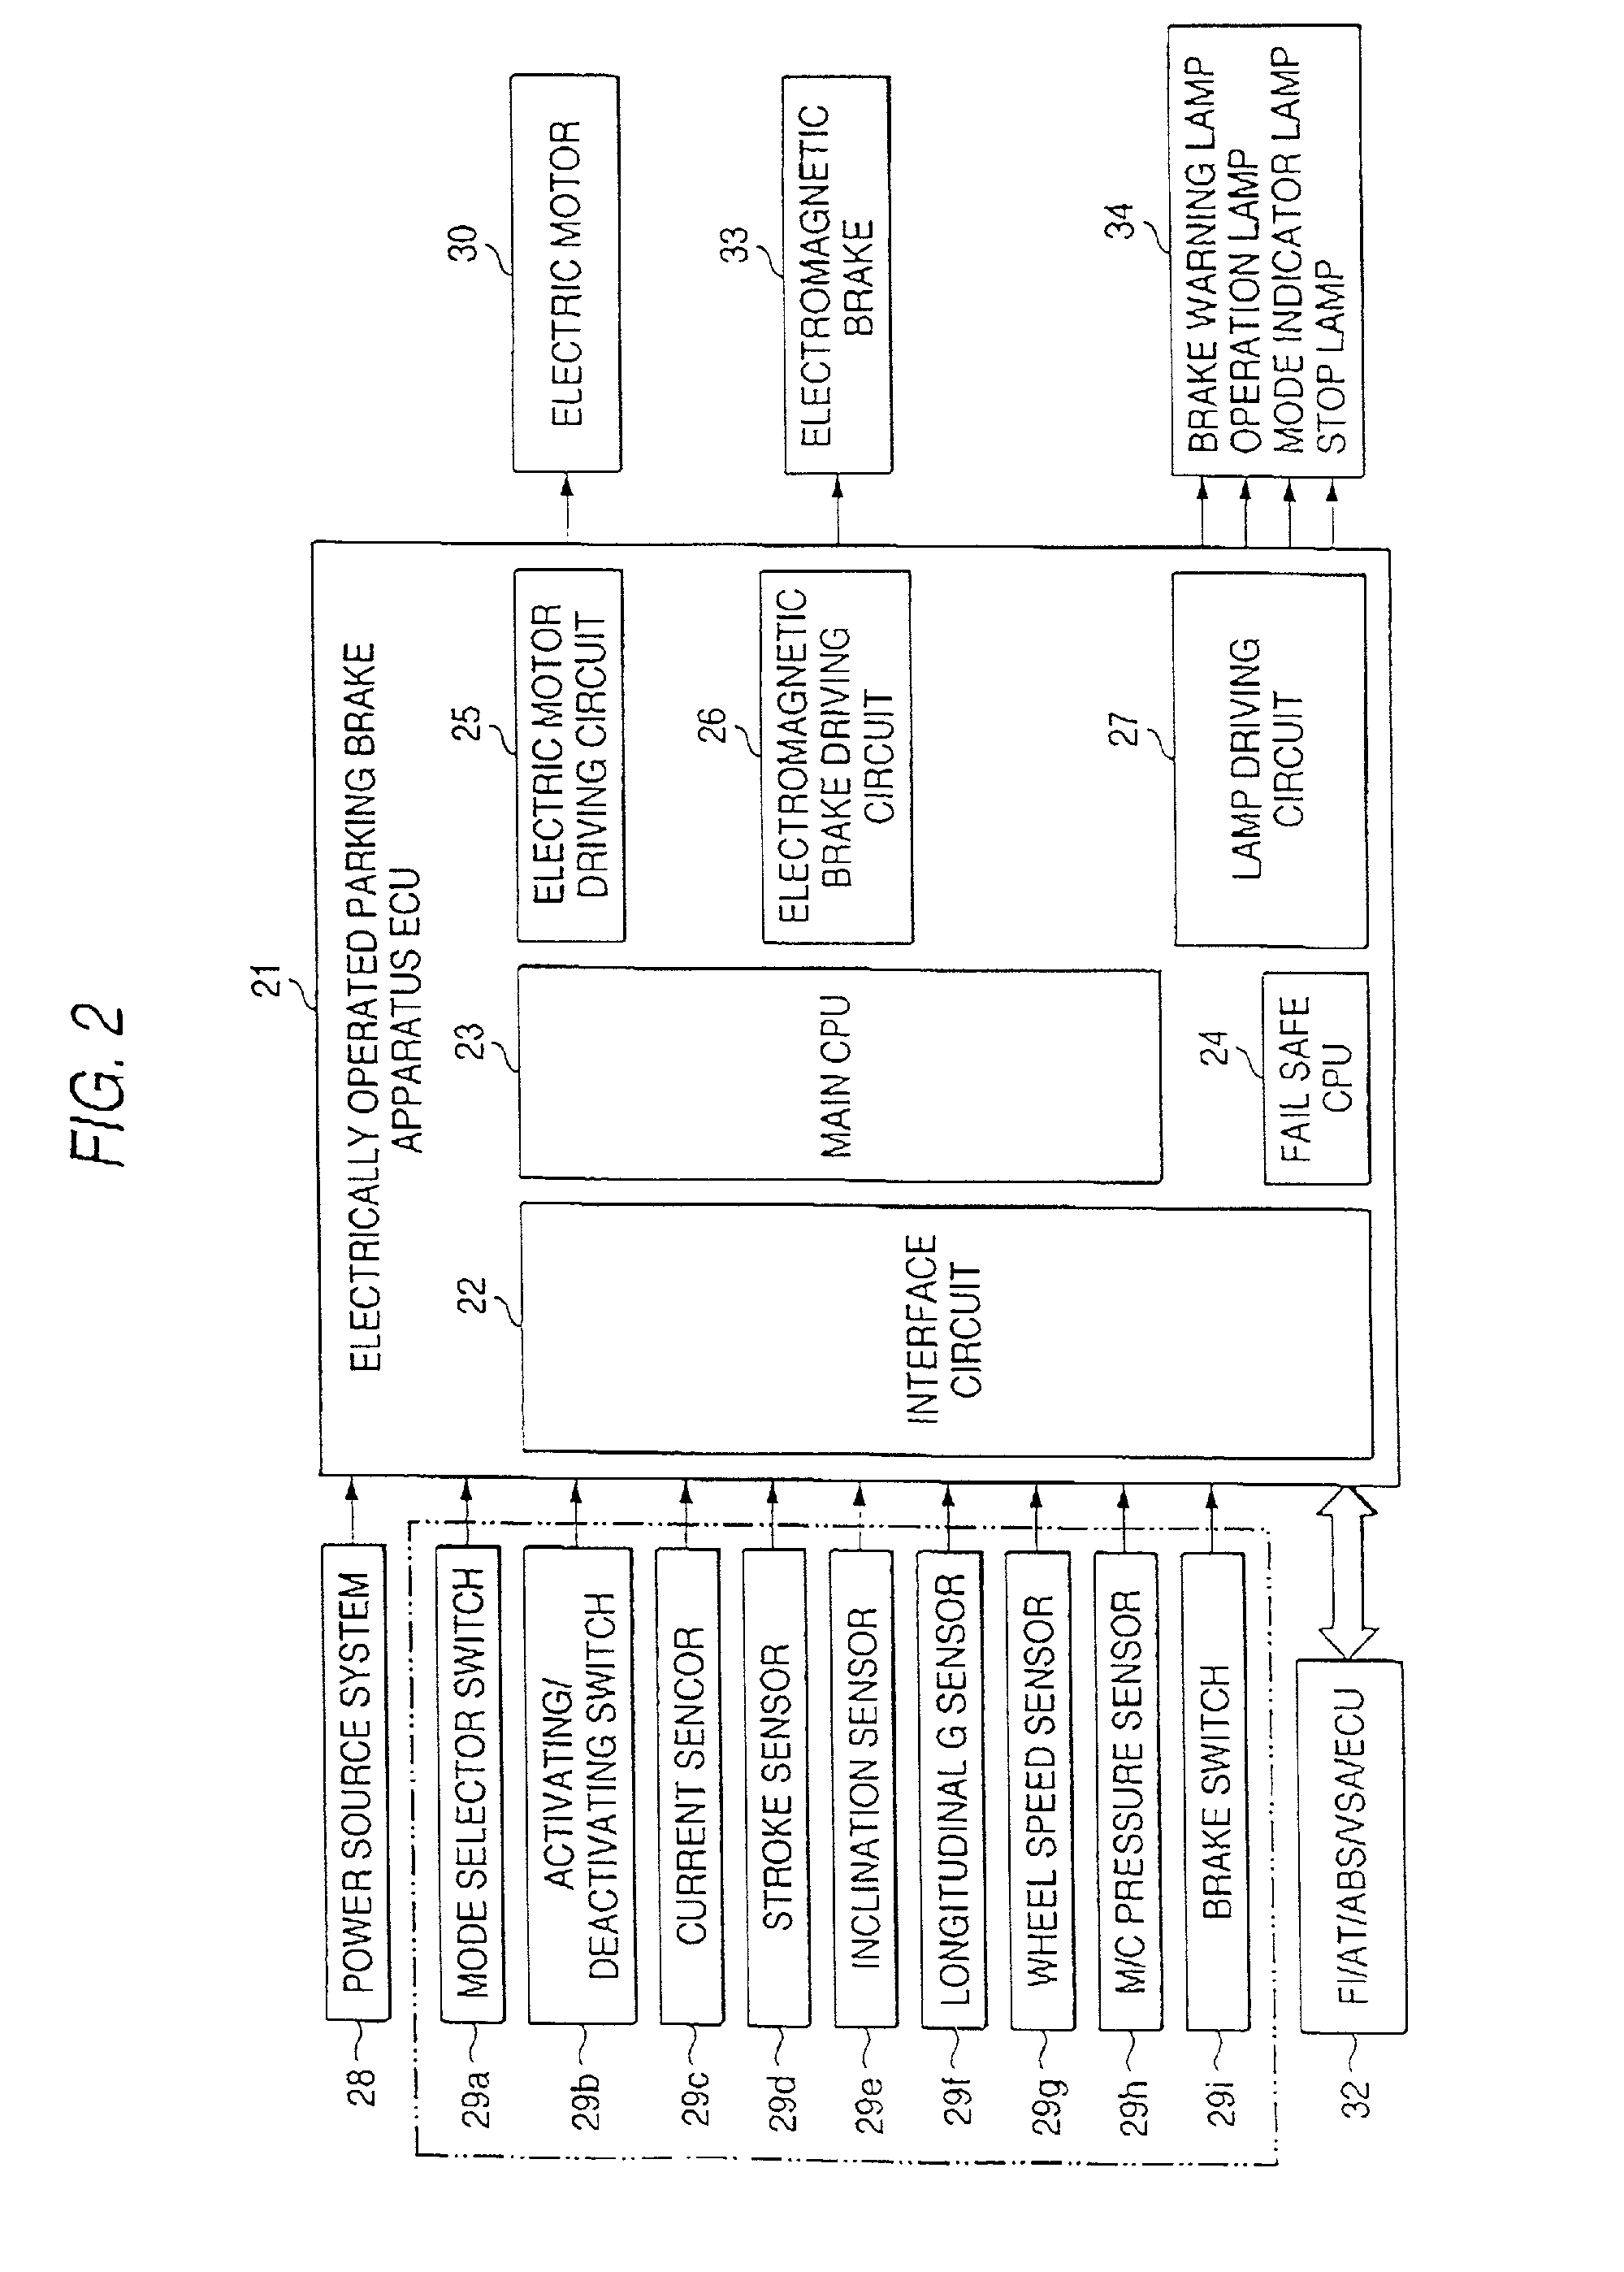 Electrically operated parking brake apparatus